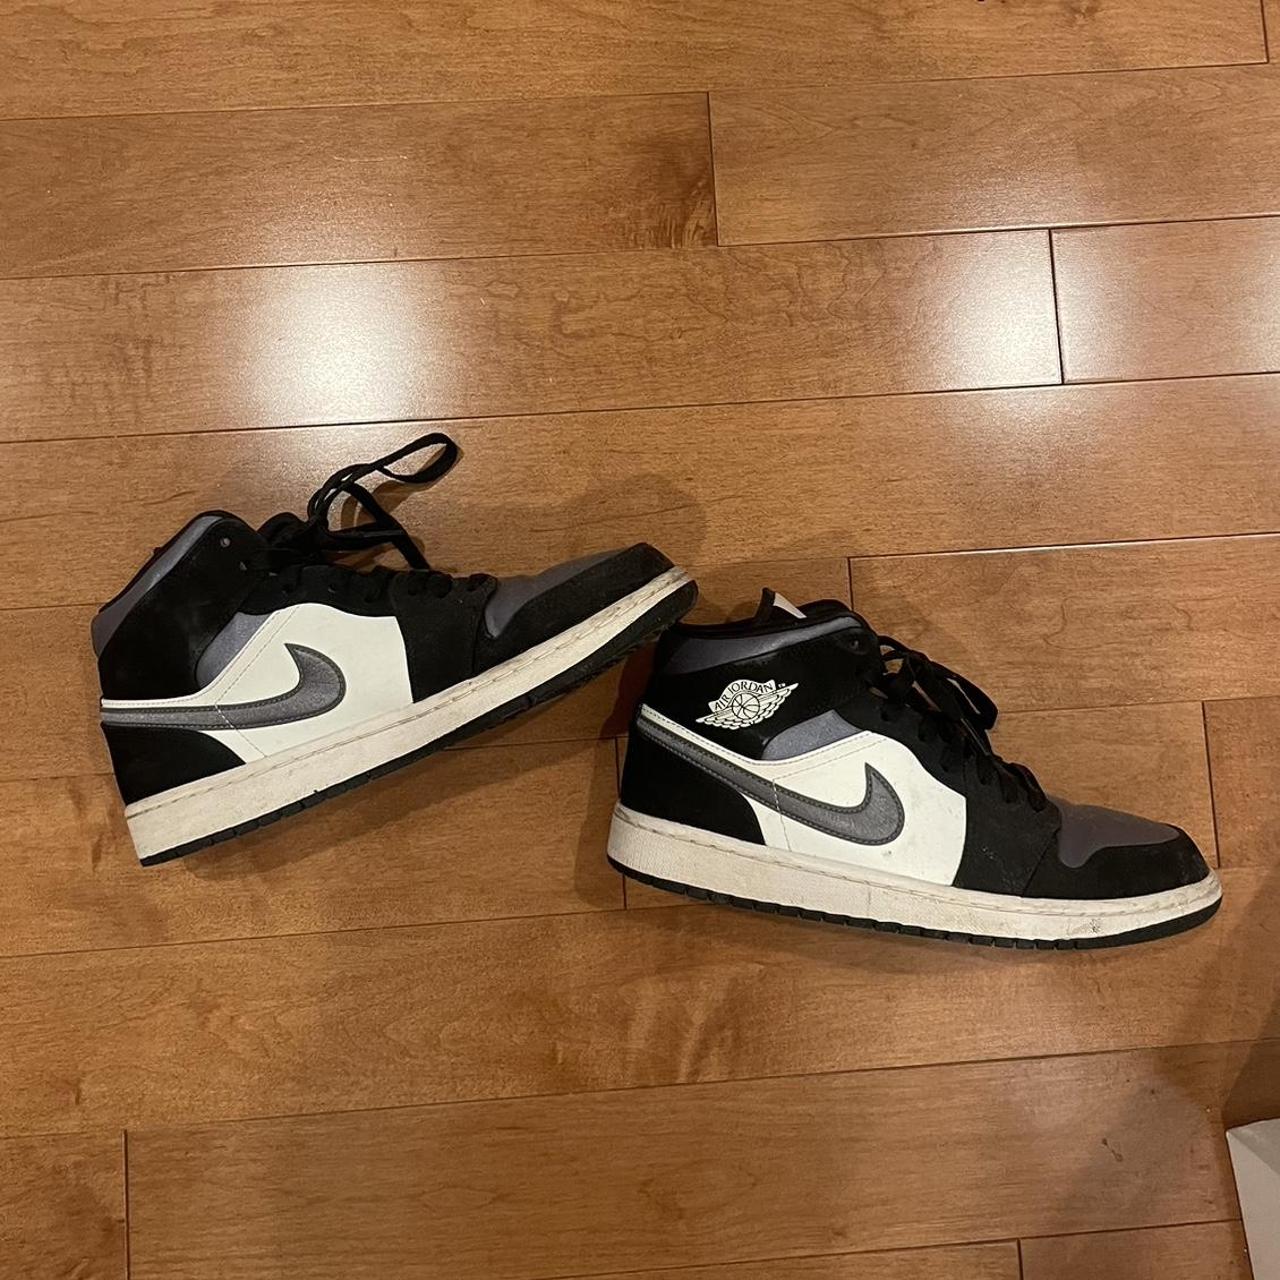 Air Jordan 1’s in silver and black colors. These... - Depop